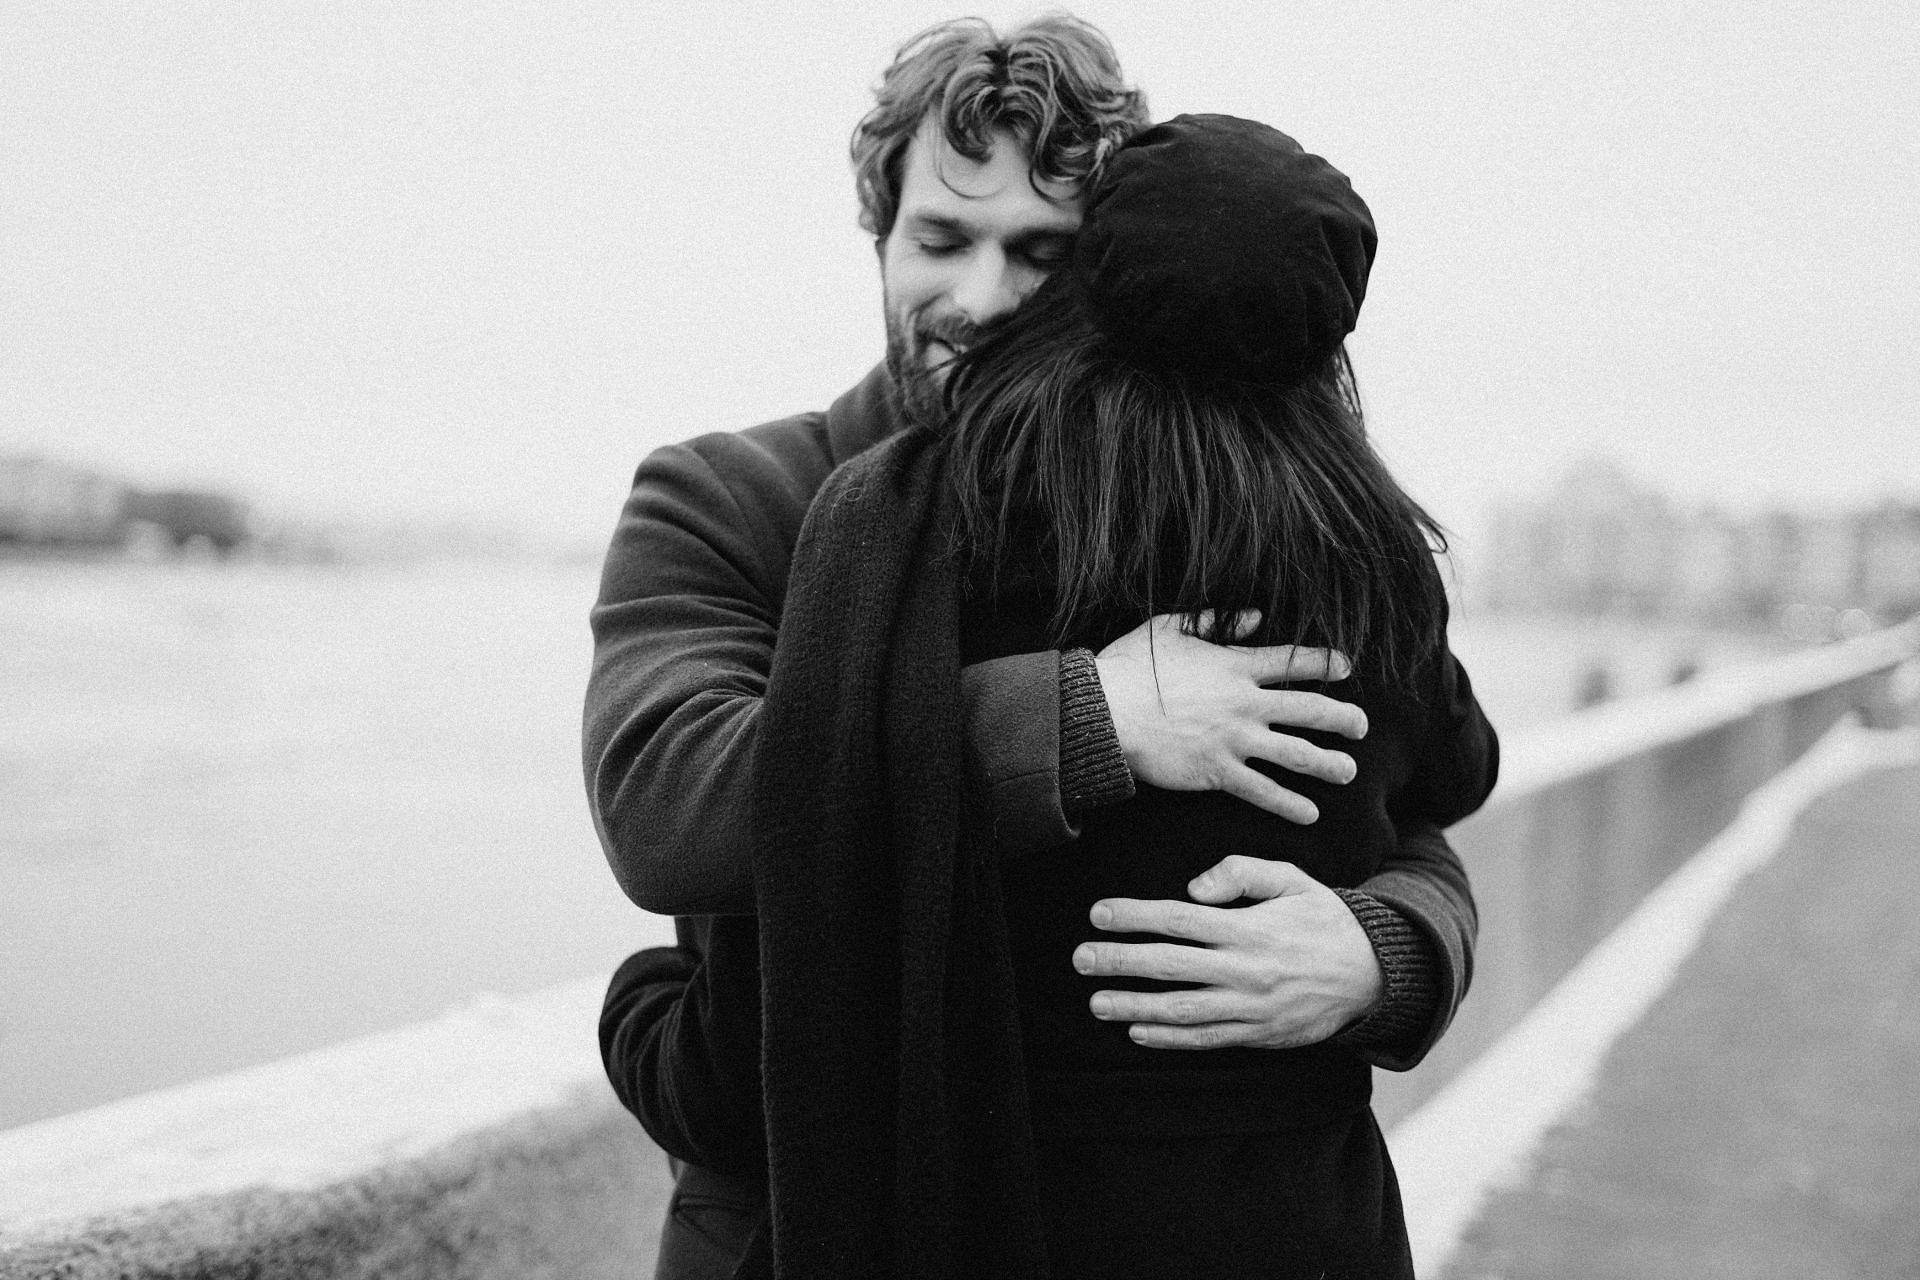 Attachment styles form the basis of our relationship. (Image via Pexels/ Cottonbro)